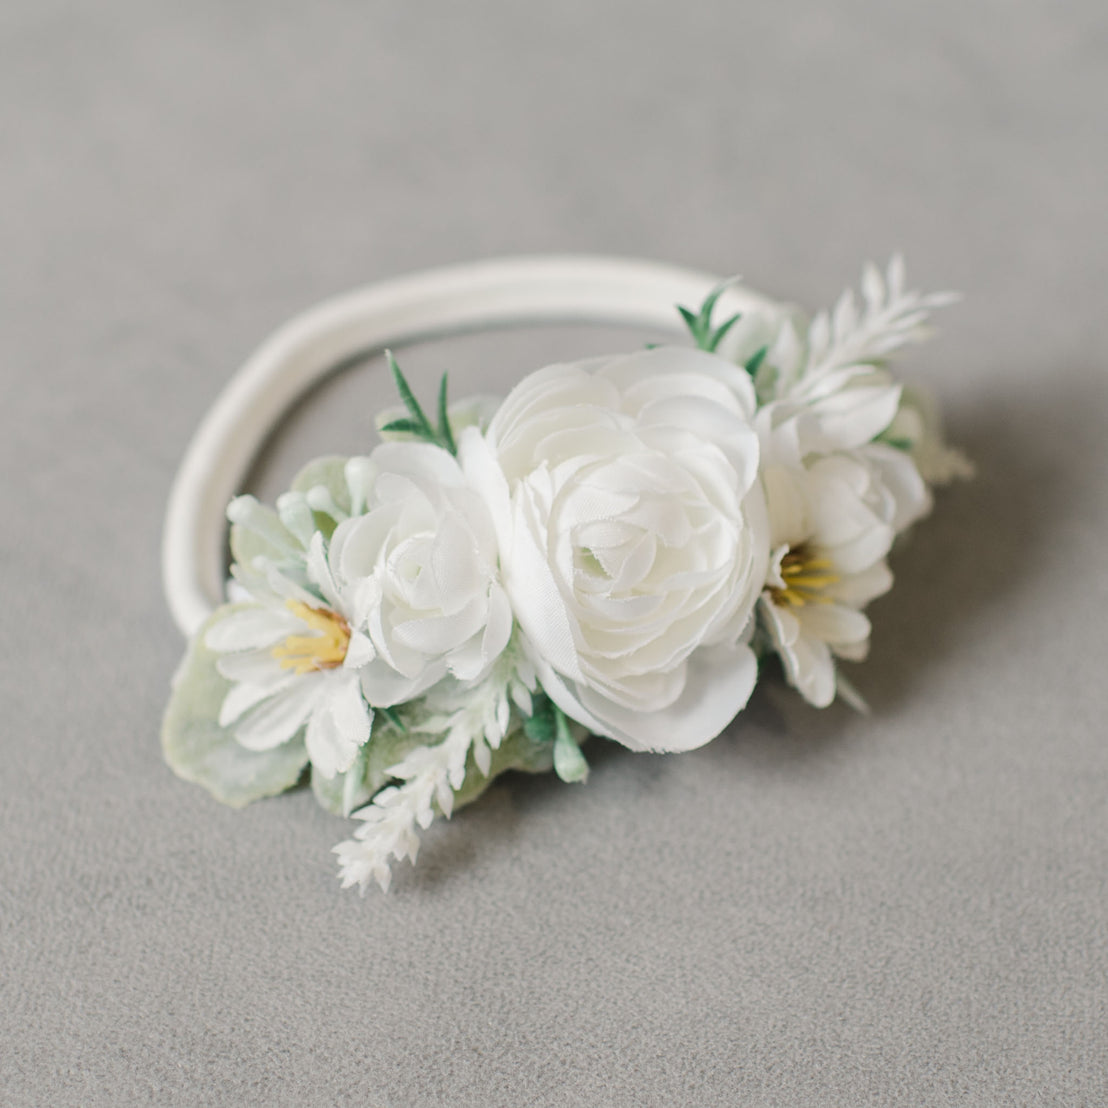 The Aria Flower Headband that features a delicate floral arrangement of white flowers and green leaves on a super soft nylon band. The Aria Flower Headband lies on a textured grey background.